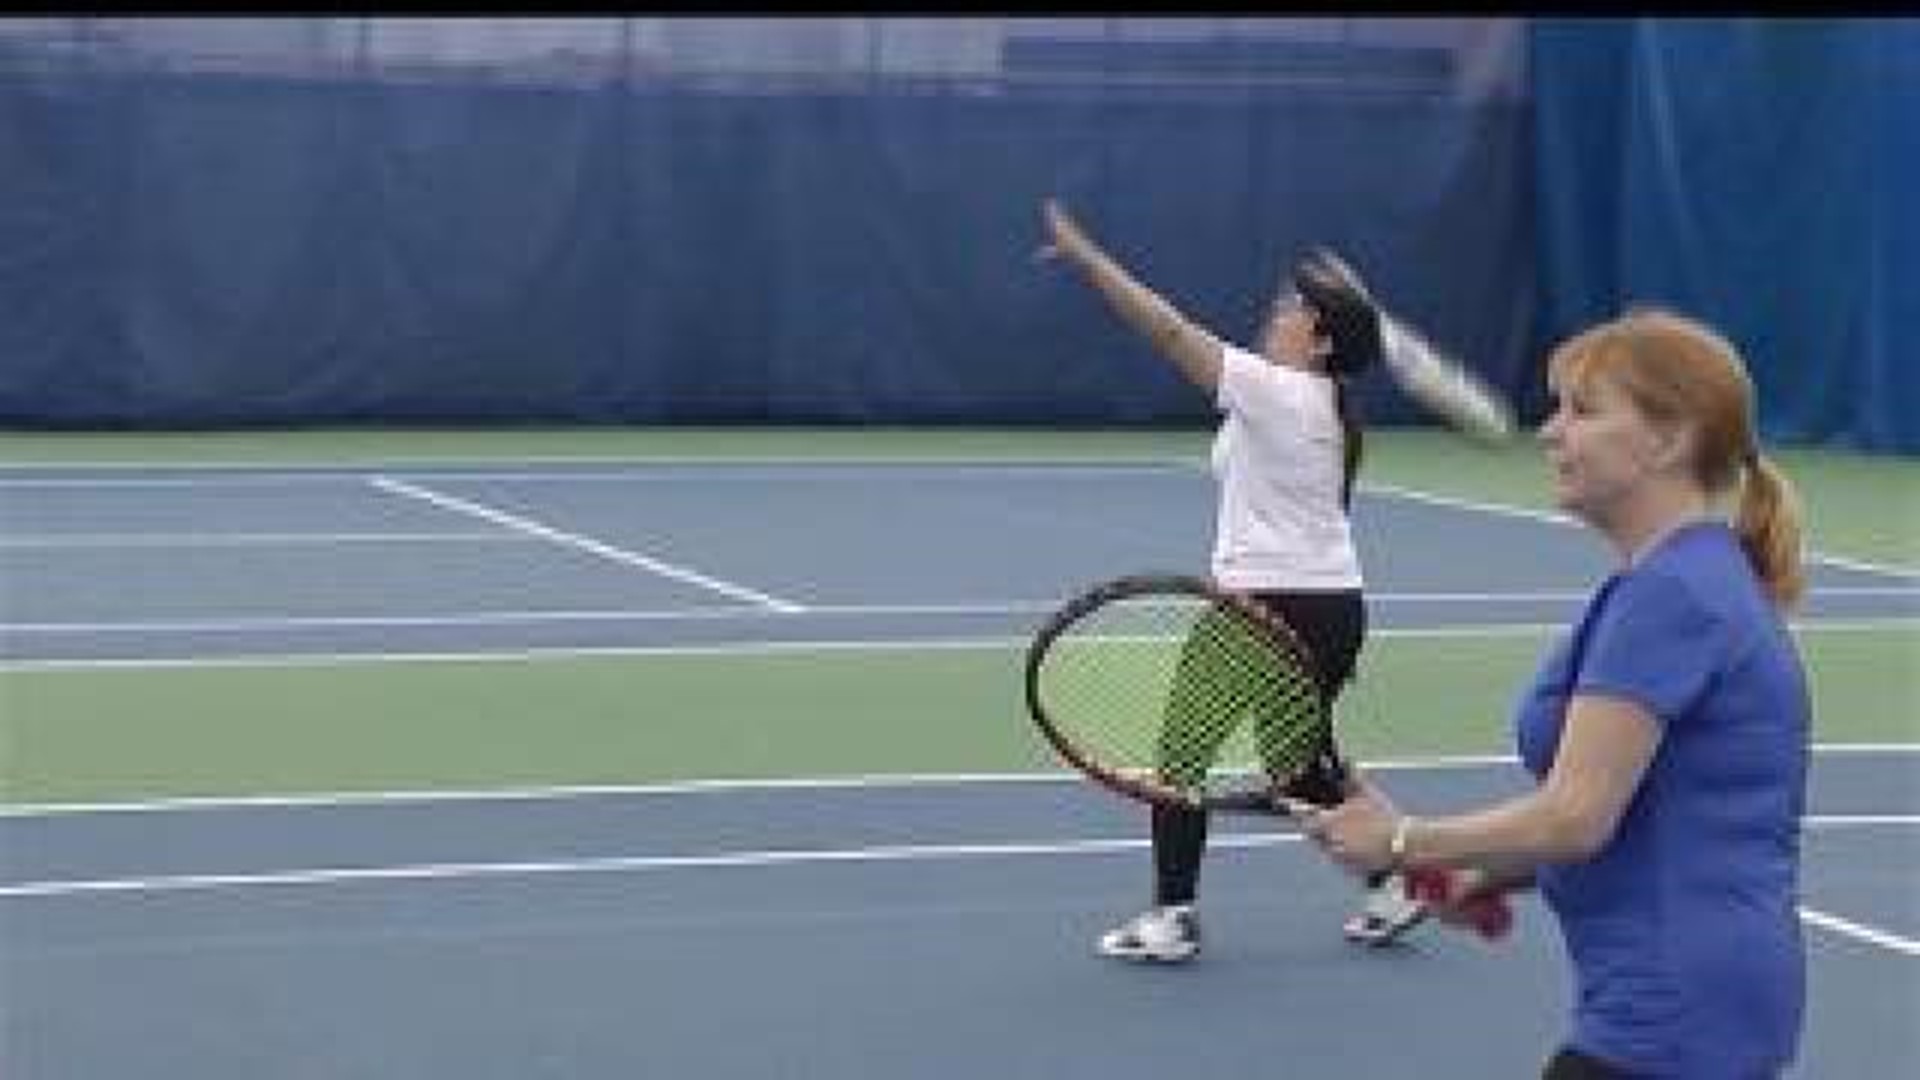 Tennis serves players throughout life